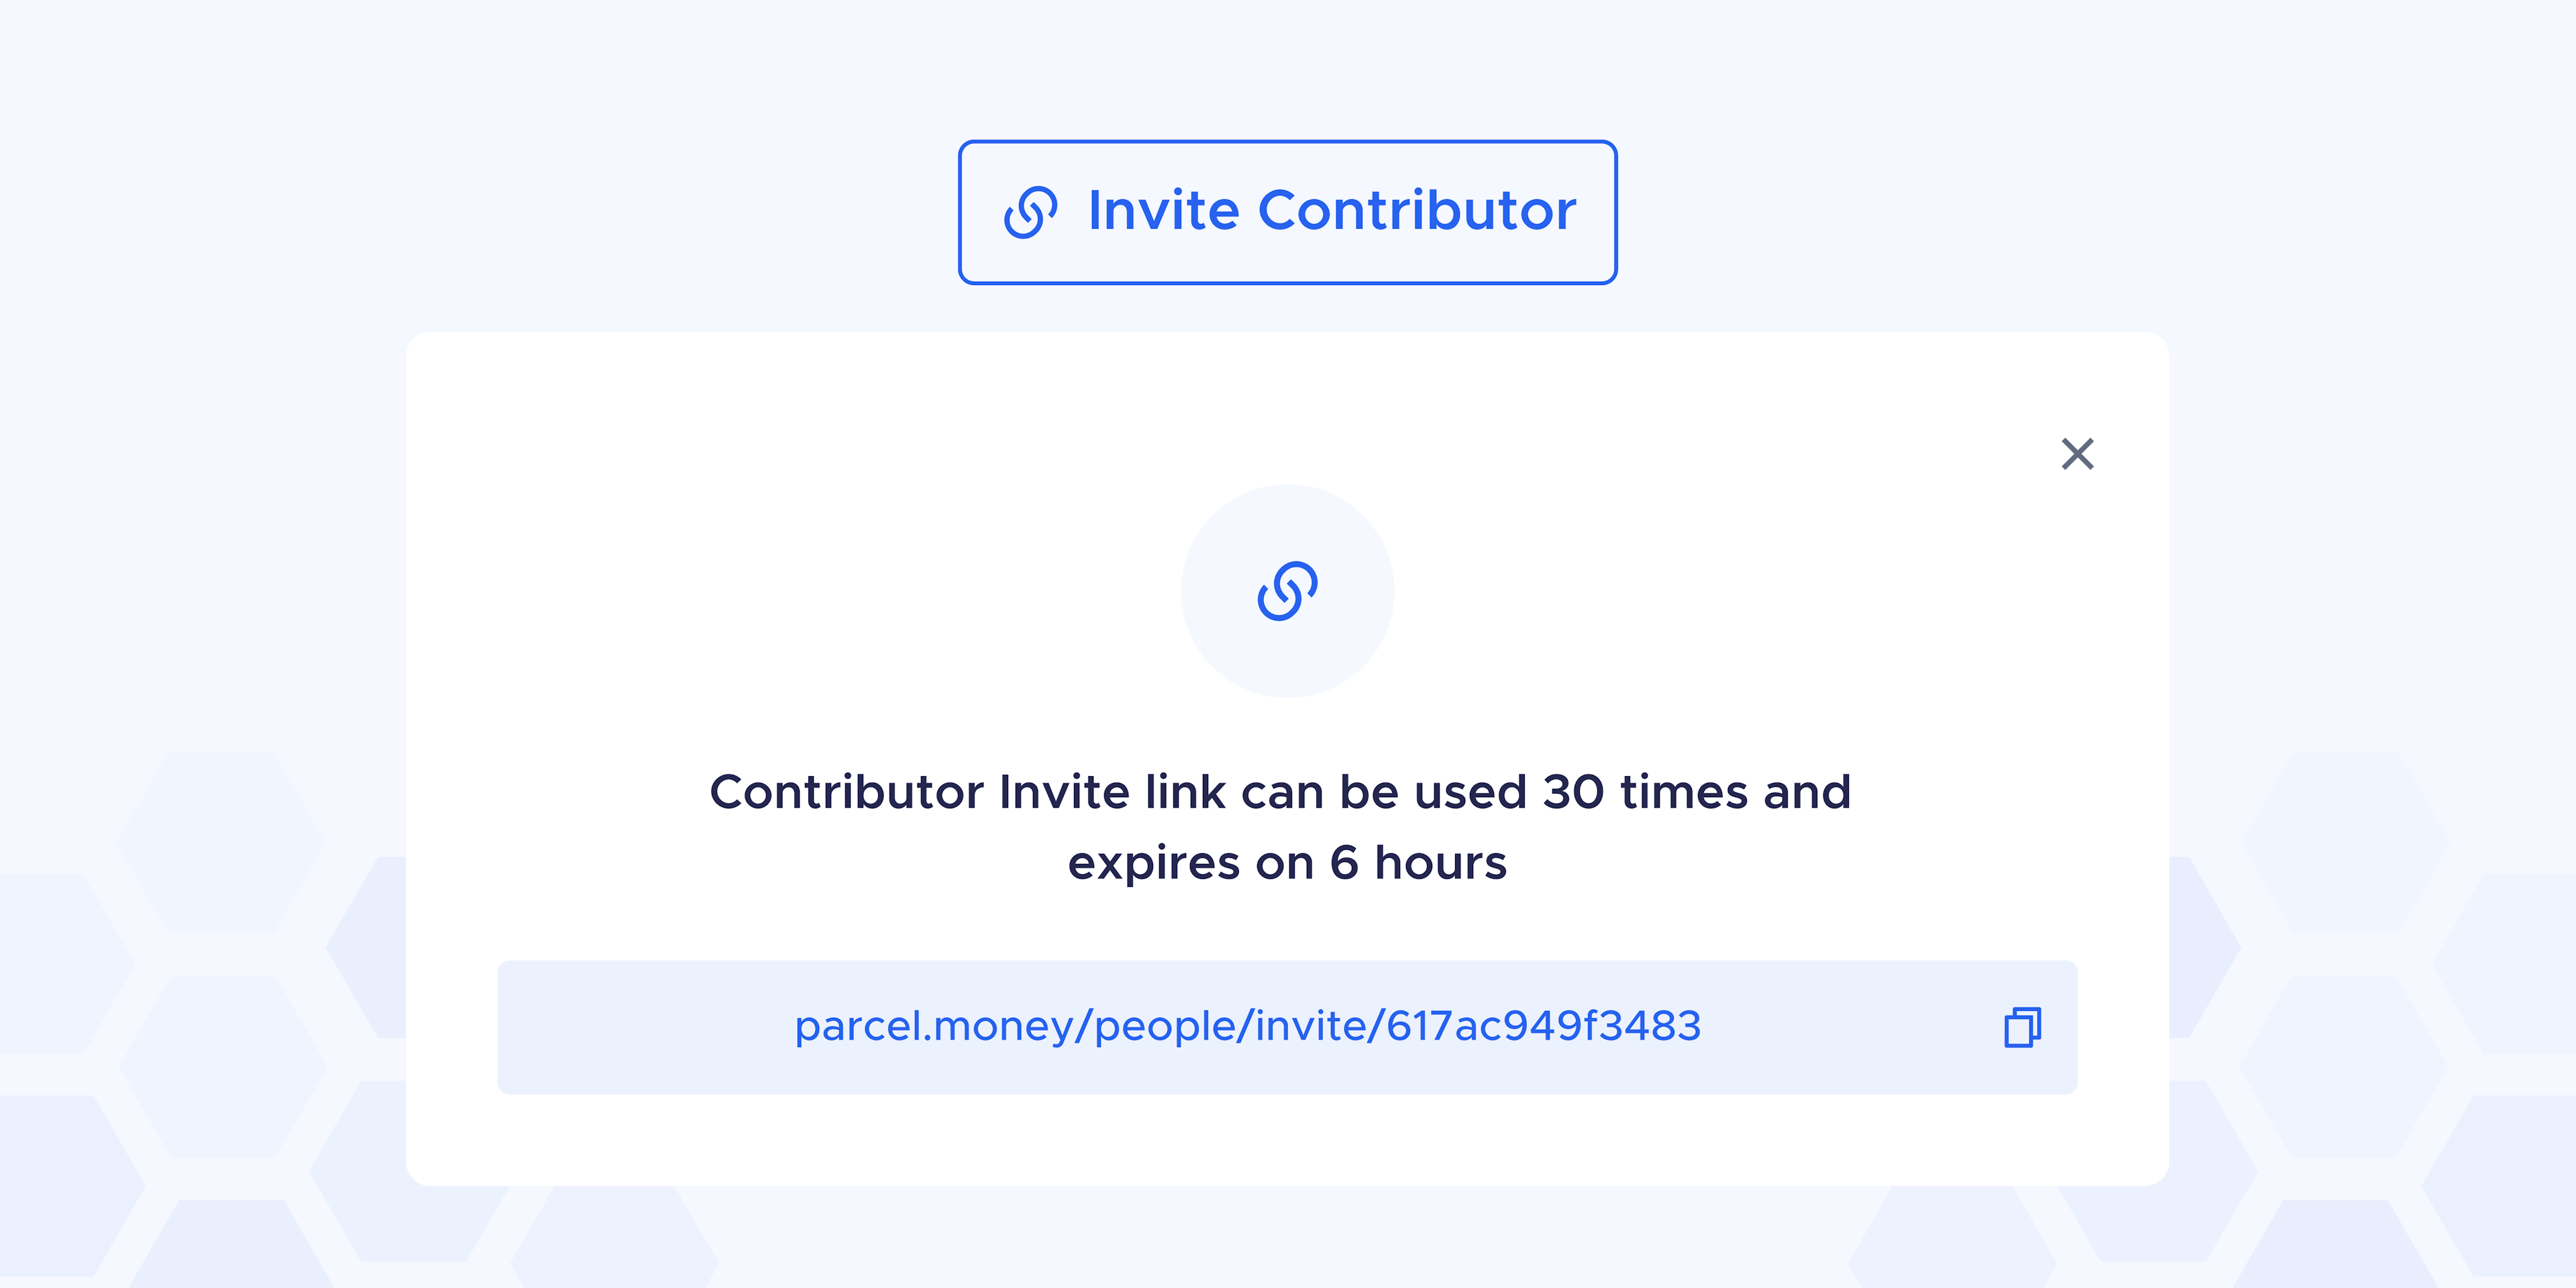 Onboarding Contributors with Invite Links